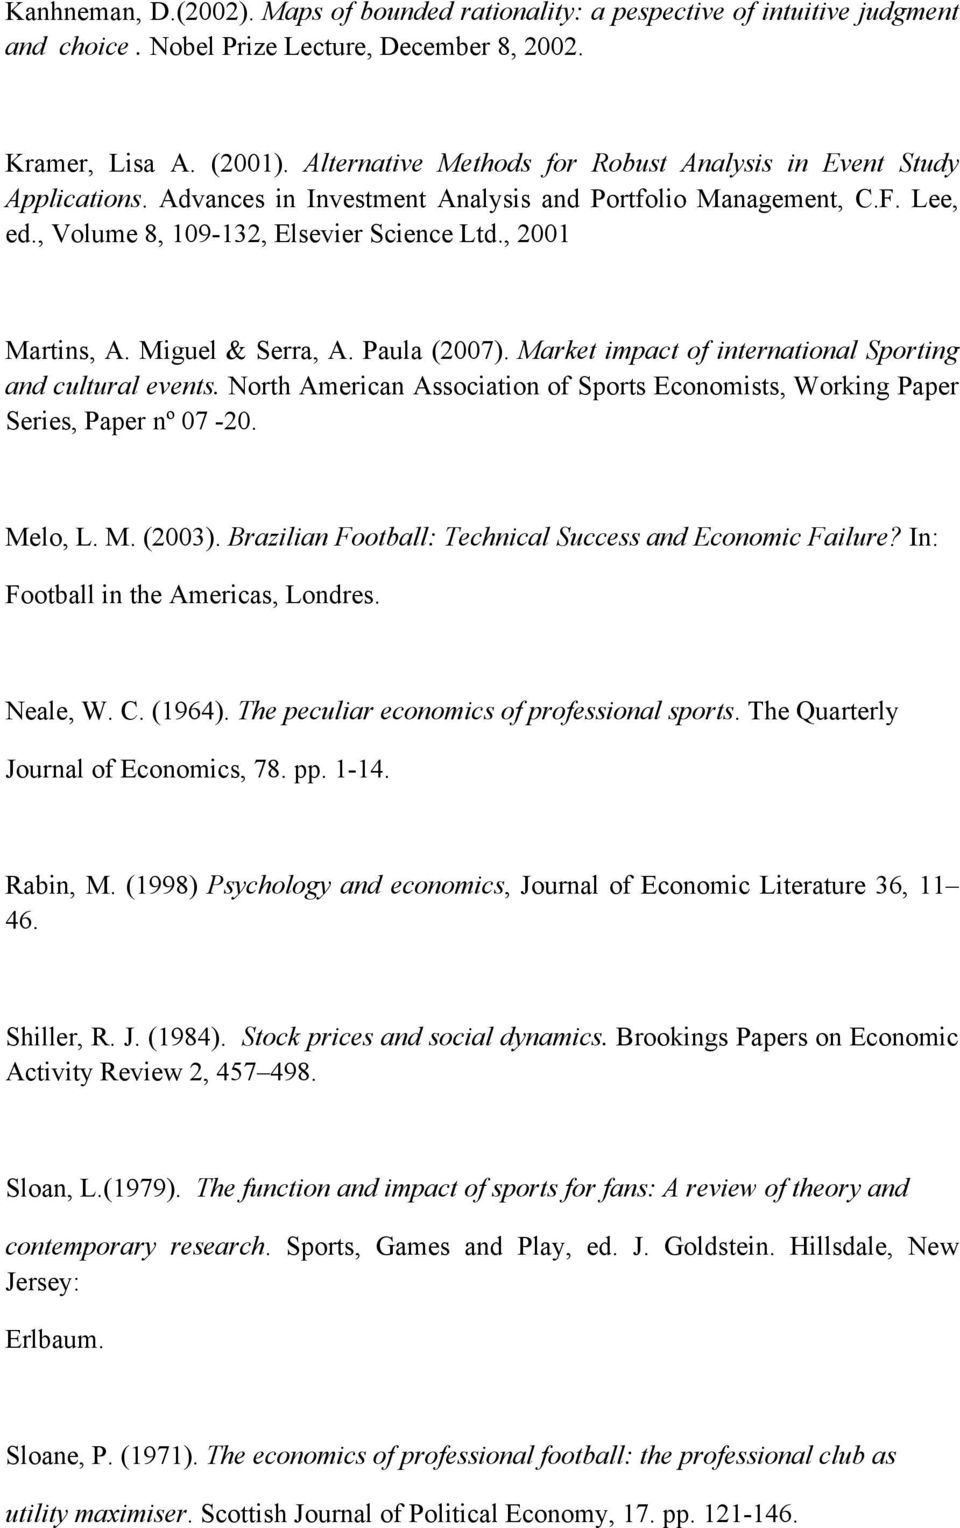 Miguel & Serra, A. Paula (2007). Marke impac of inernaional Sporing and culural evens. Norh American Associaion of Spors Economiss, Working Paper Series, Paper nº 07-20. Melo, L. M. (2003).